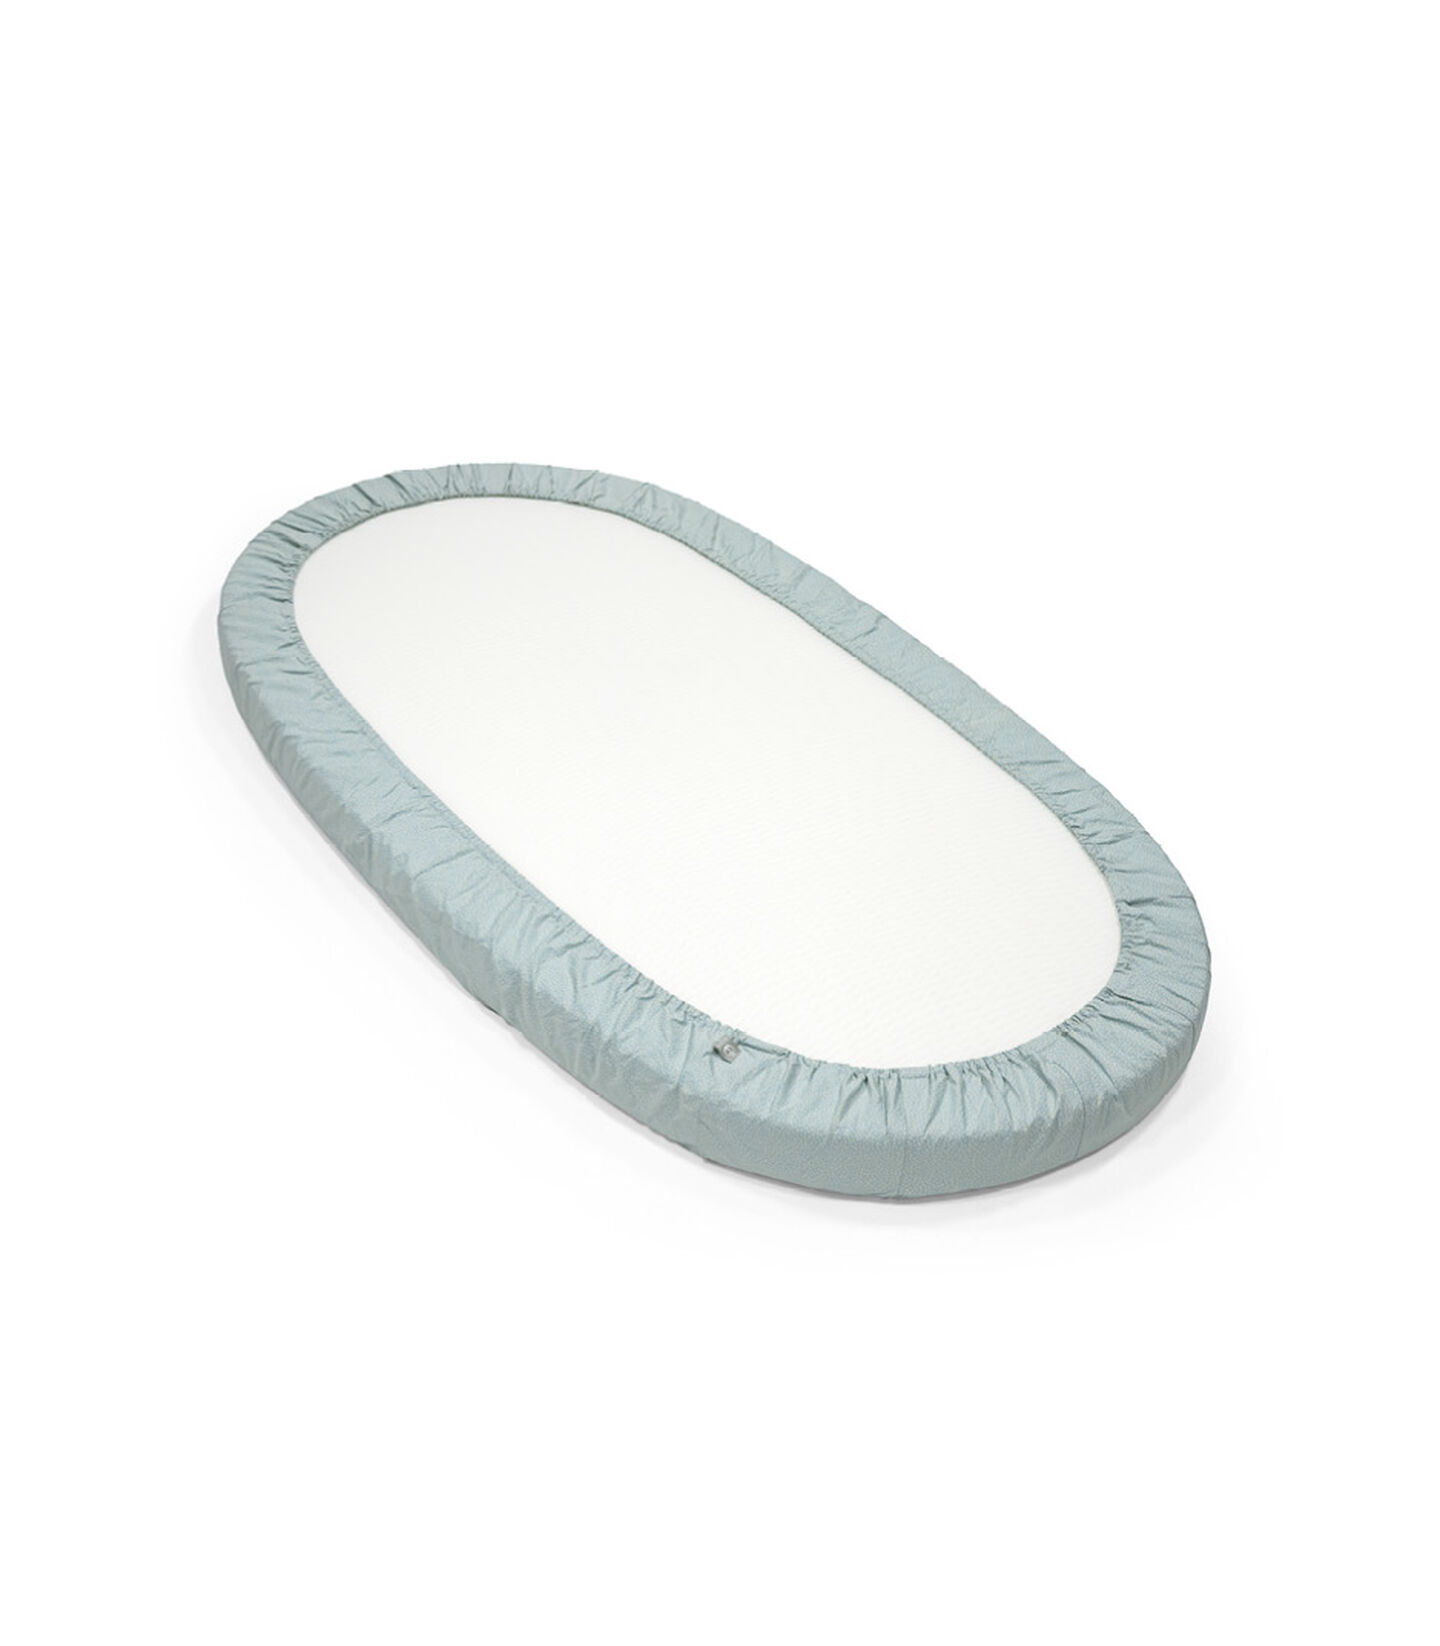 Stokke® Sleepi™ Bed Mattress with Fitted Sheet Dots Sage. Bottom side, detail. view 2